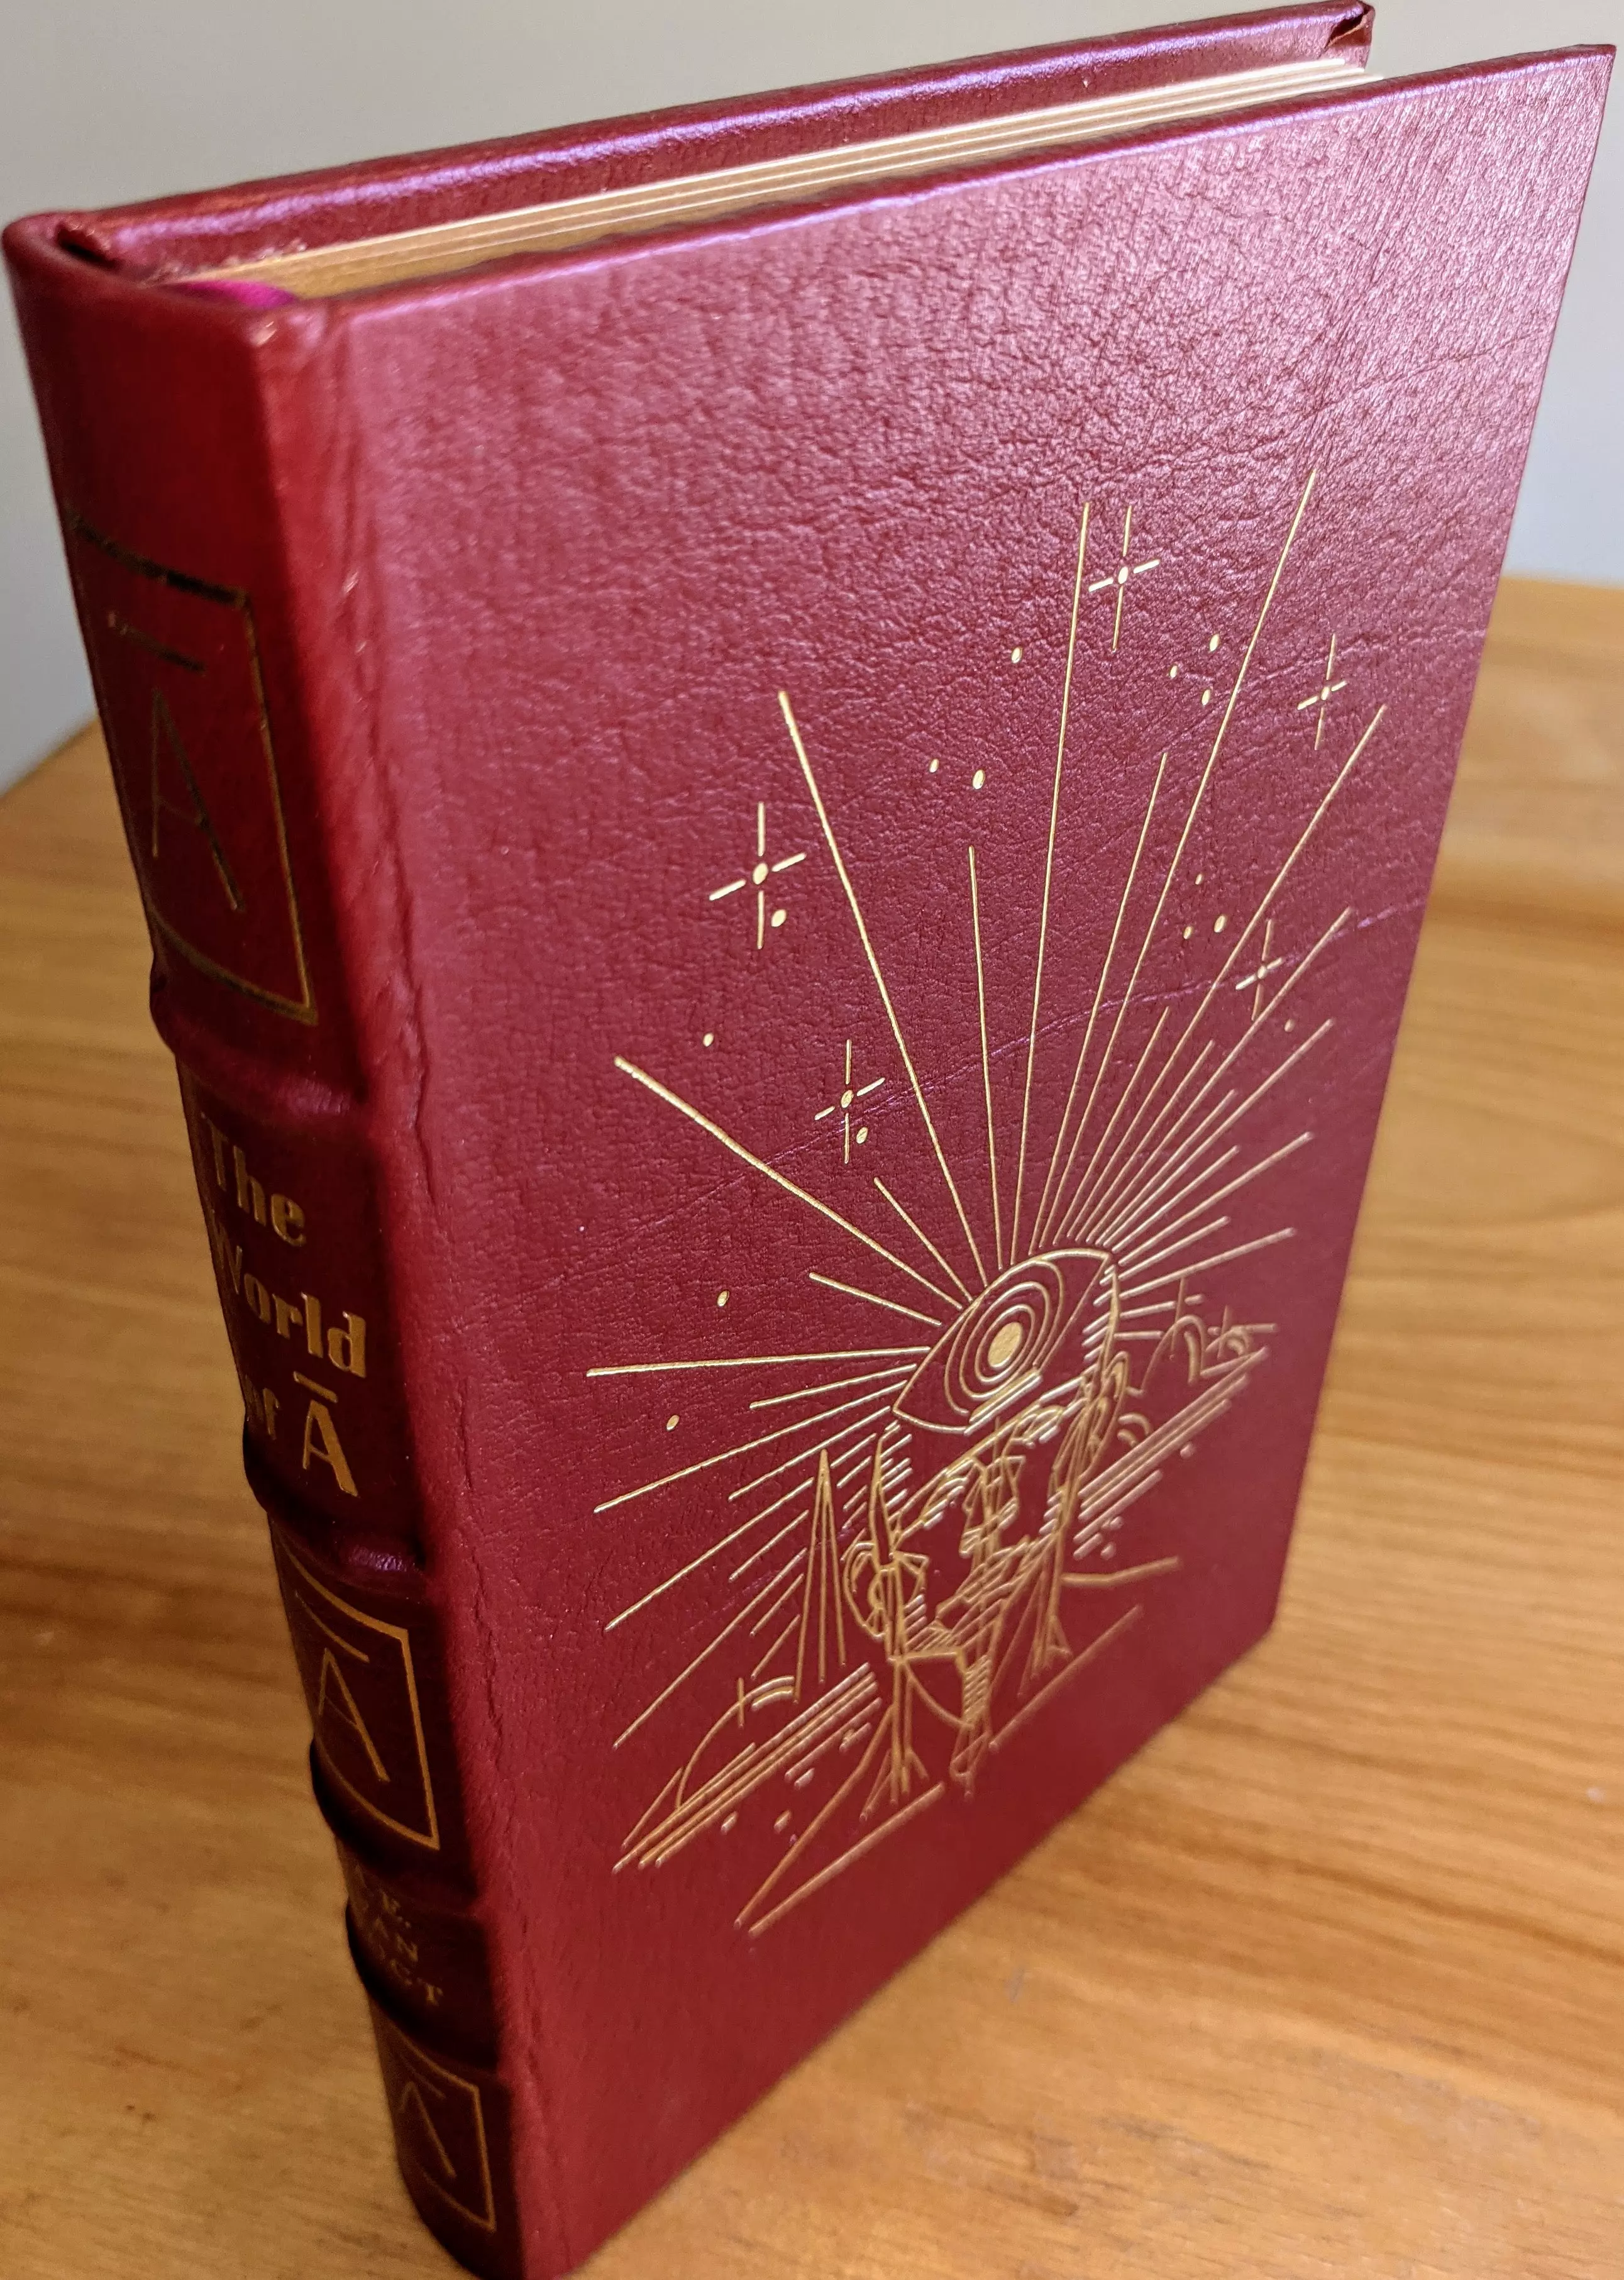 Stunning Red Leather Bound hardback book with hubbed spine, cover artwork in 22kt gold, printed on archival paper with gold gilded edges, smyth sewing & concealed muslin joints
	  - original artwork by Vincent Difate